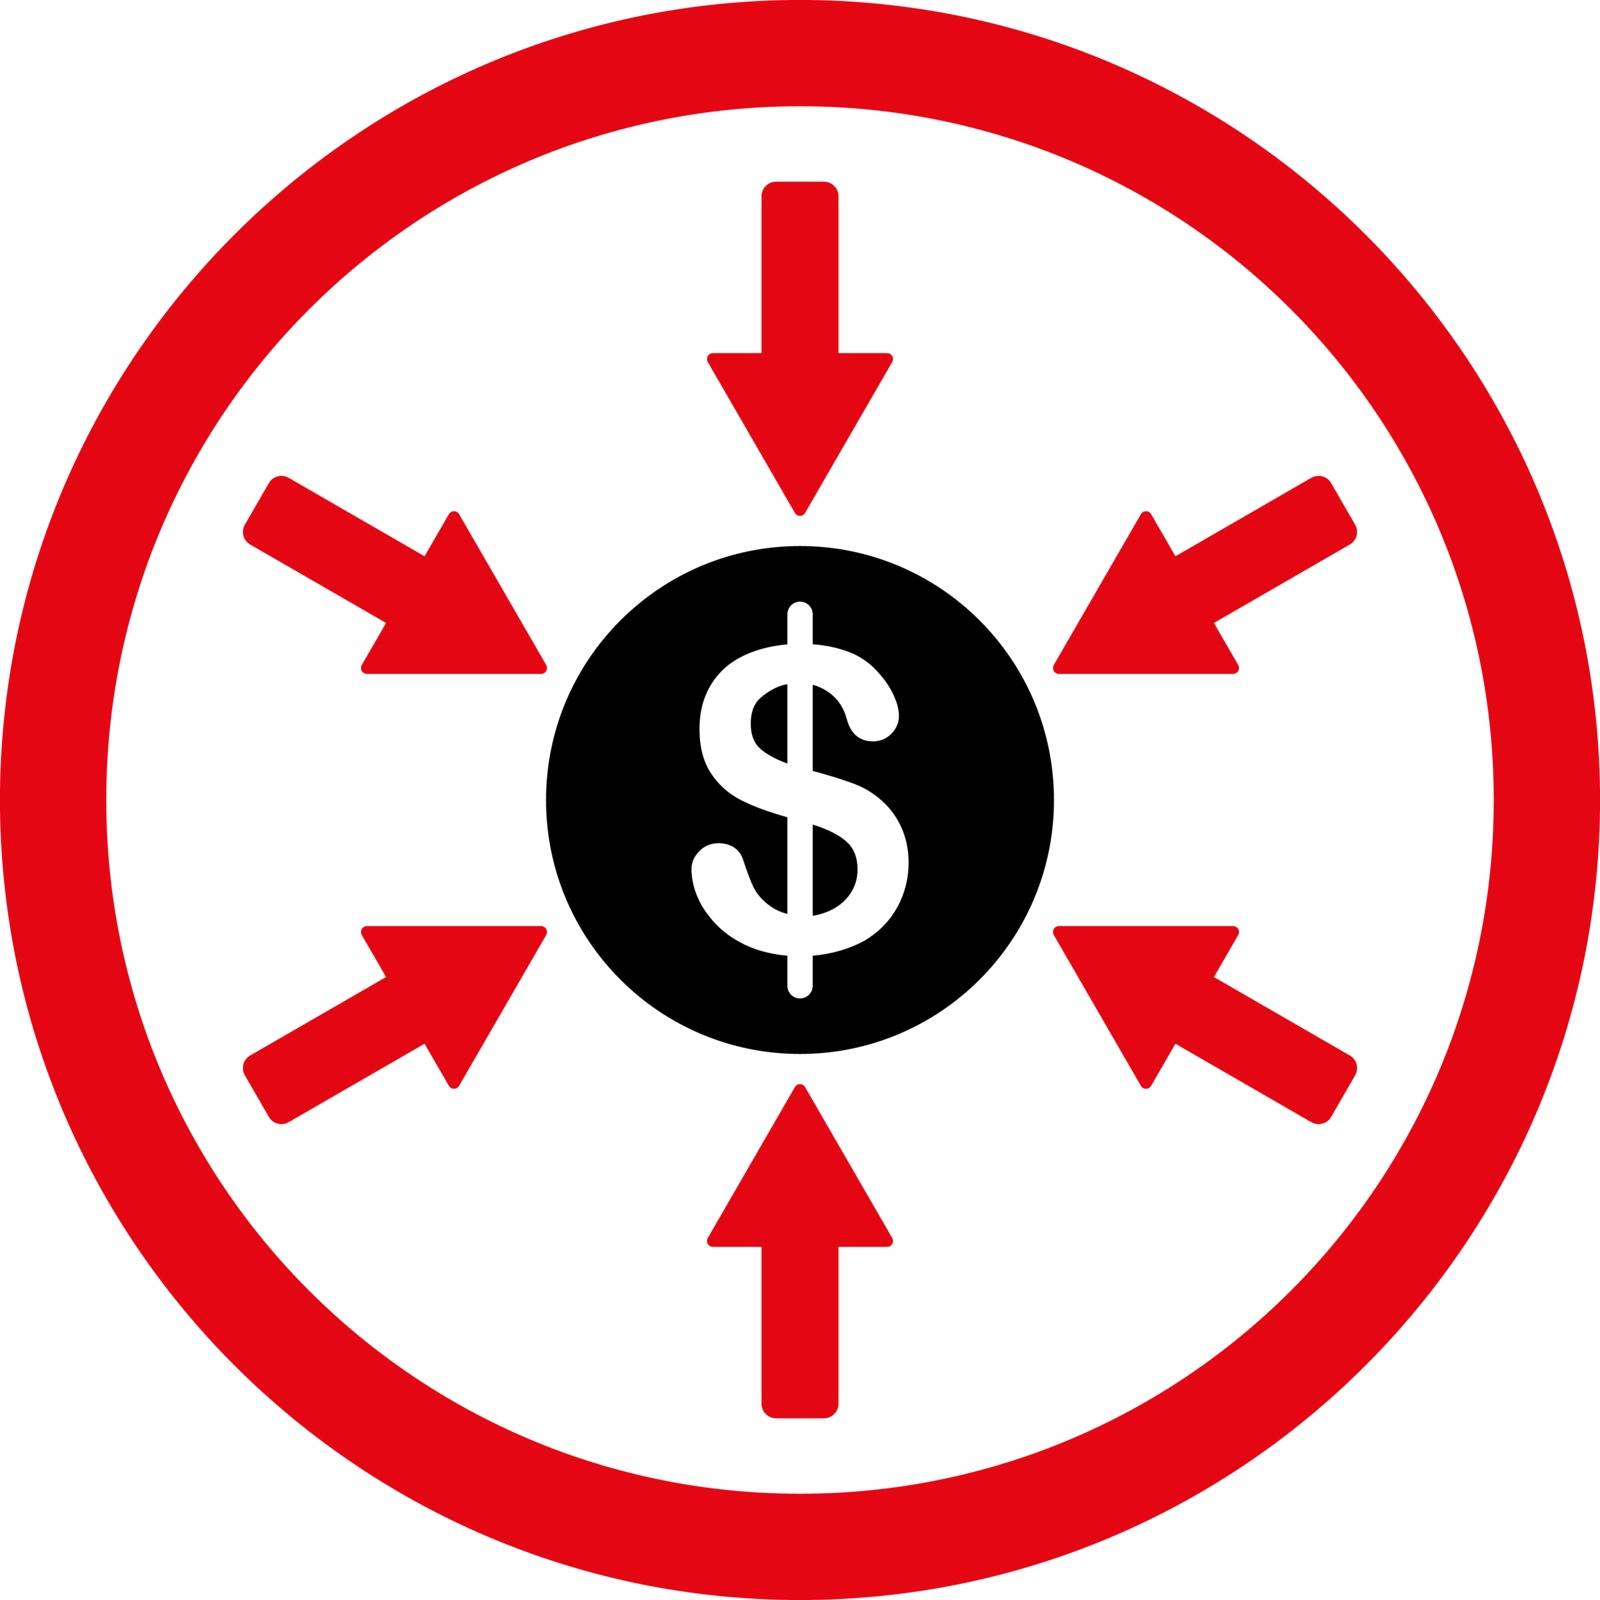 Income vector icon. This flat rounded symbol uses intensive red and black colors and isolated on a white background.